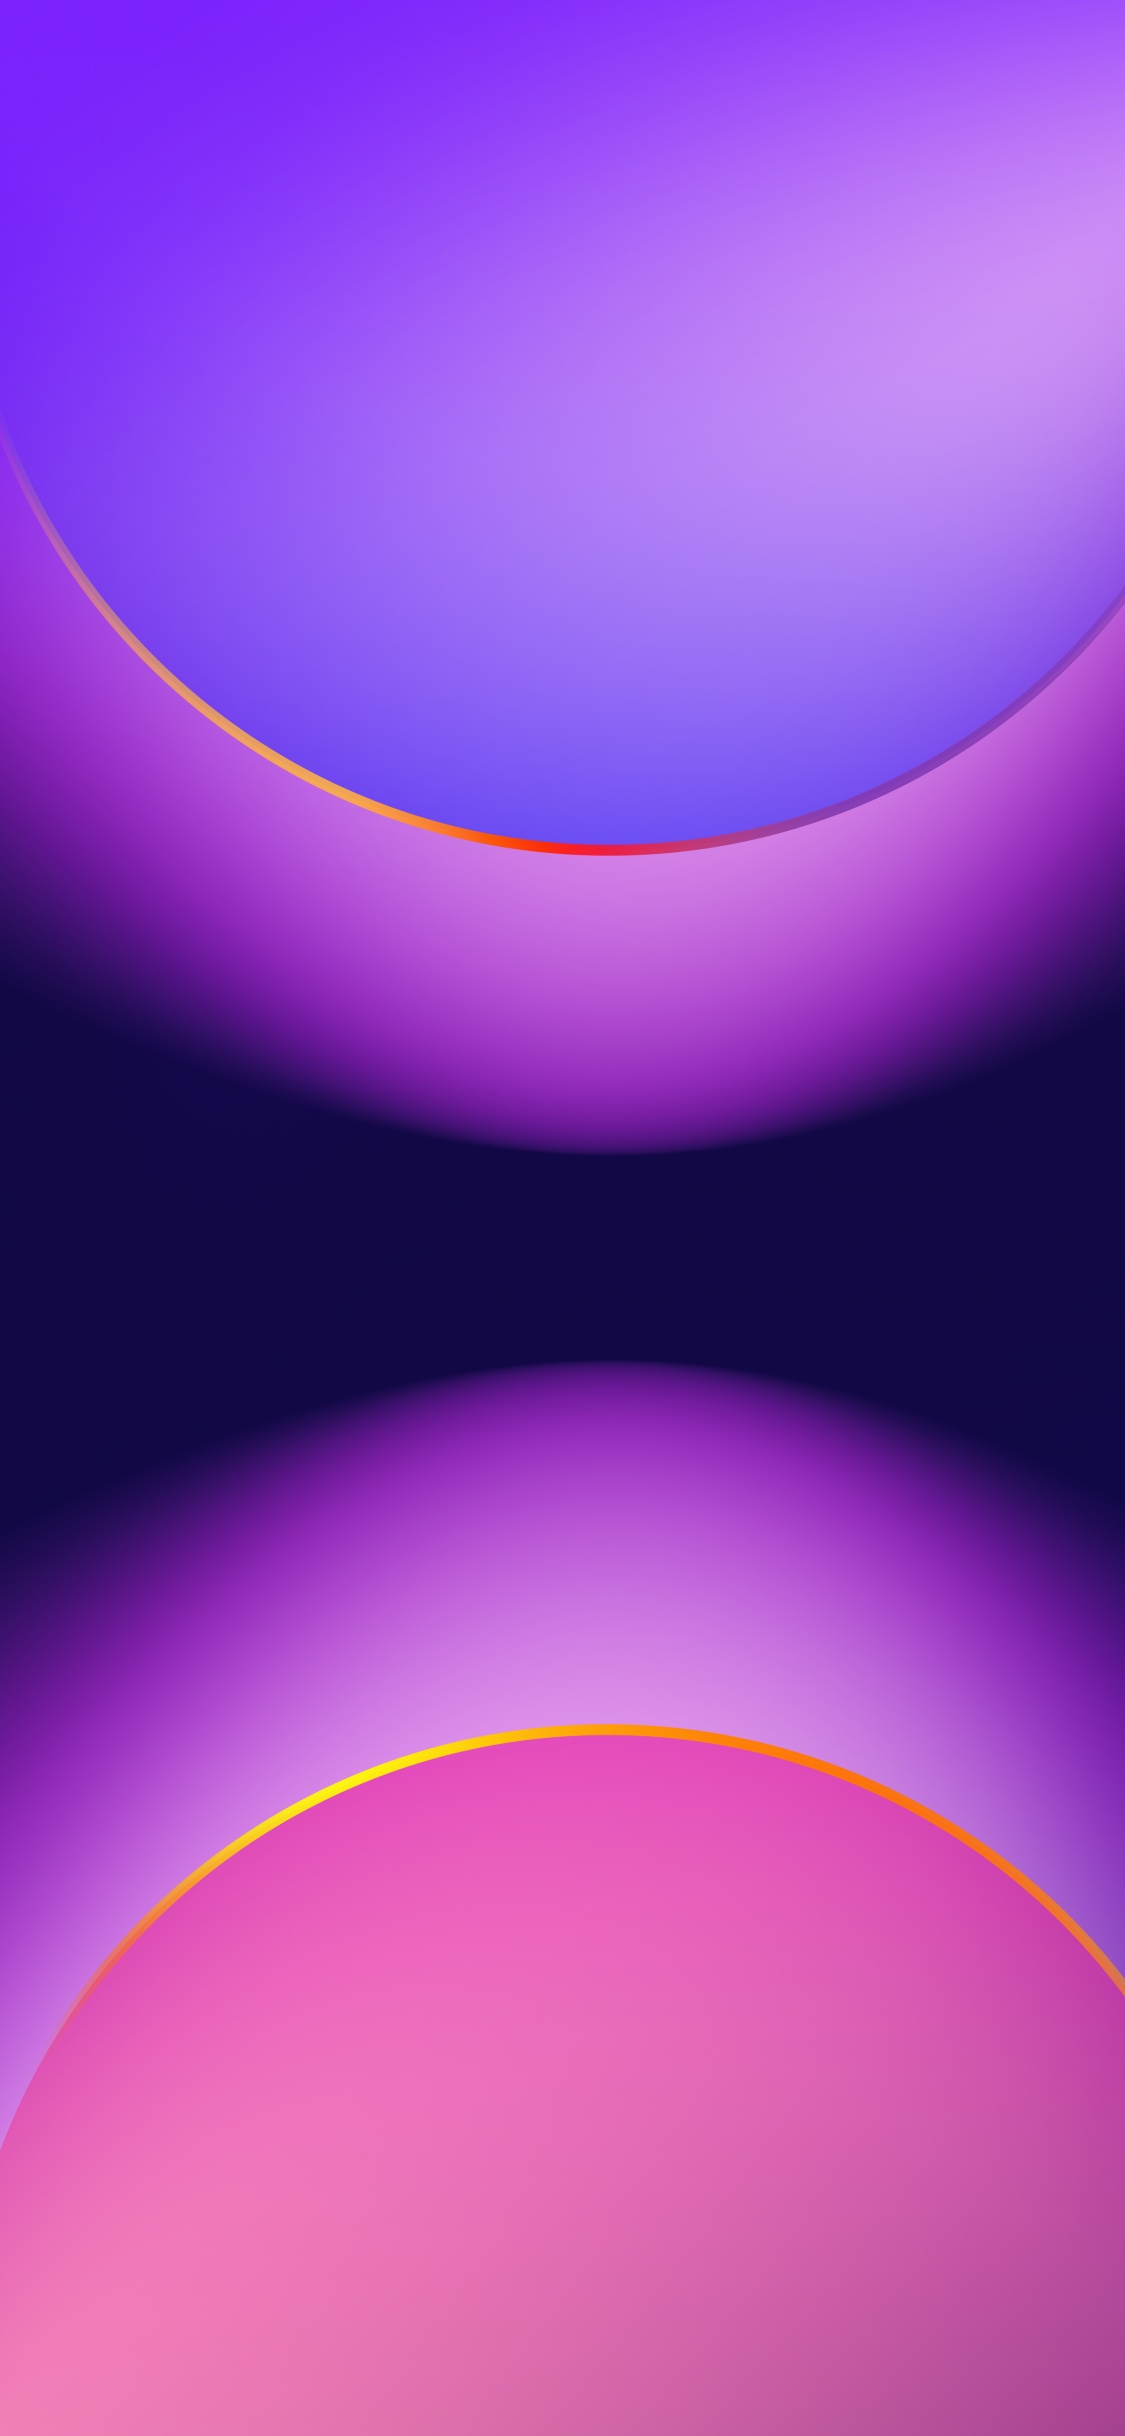 Circle, Apples, Ios, Colorfulness, Purple. Wallpaper in 1125x2436 Resolution